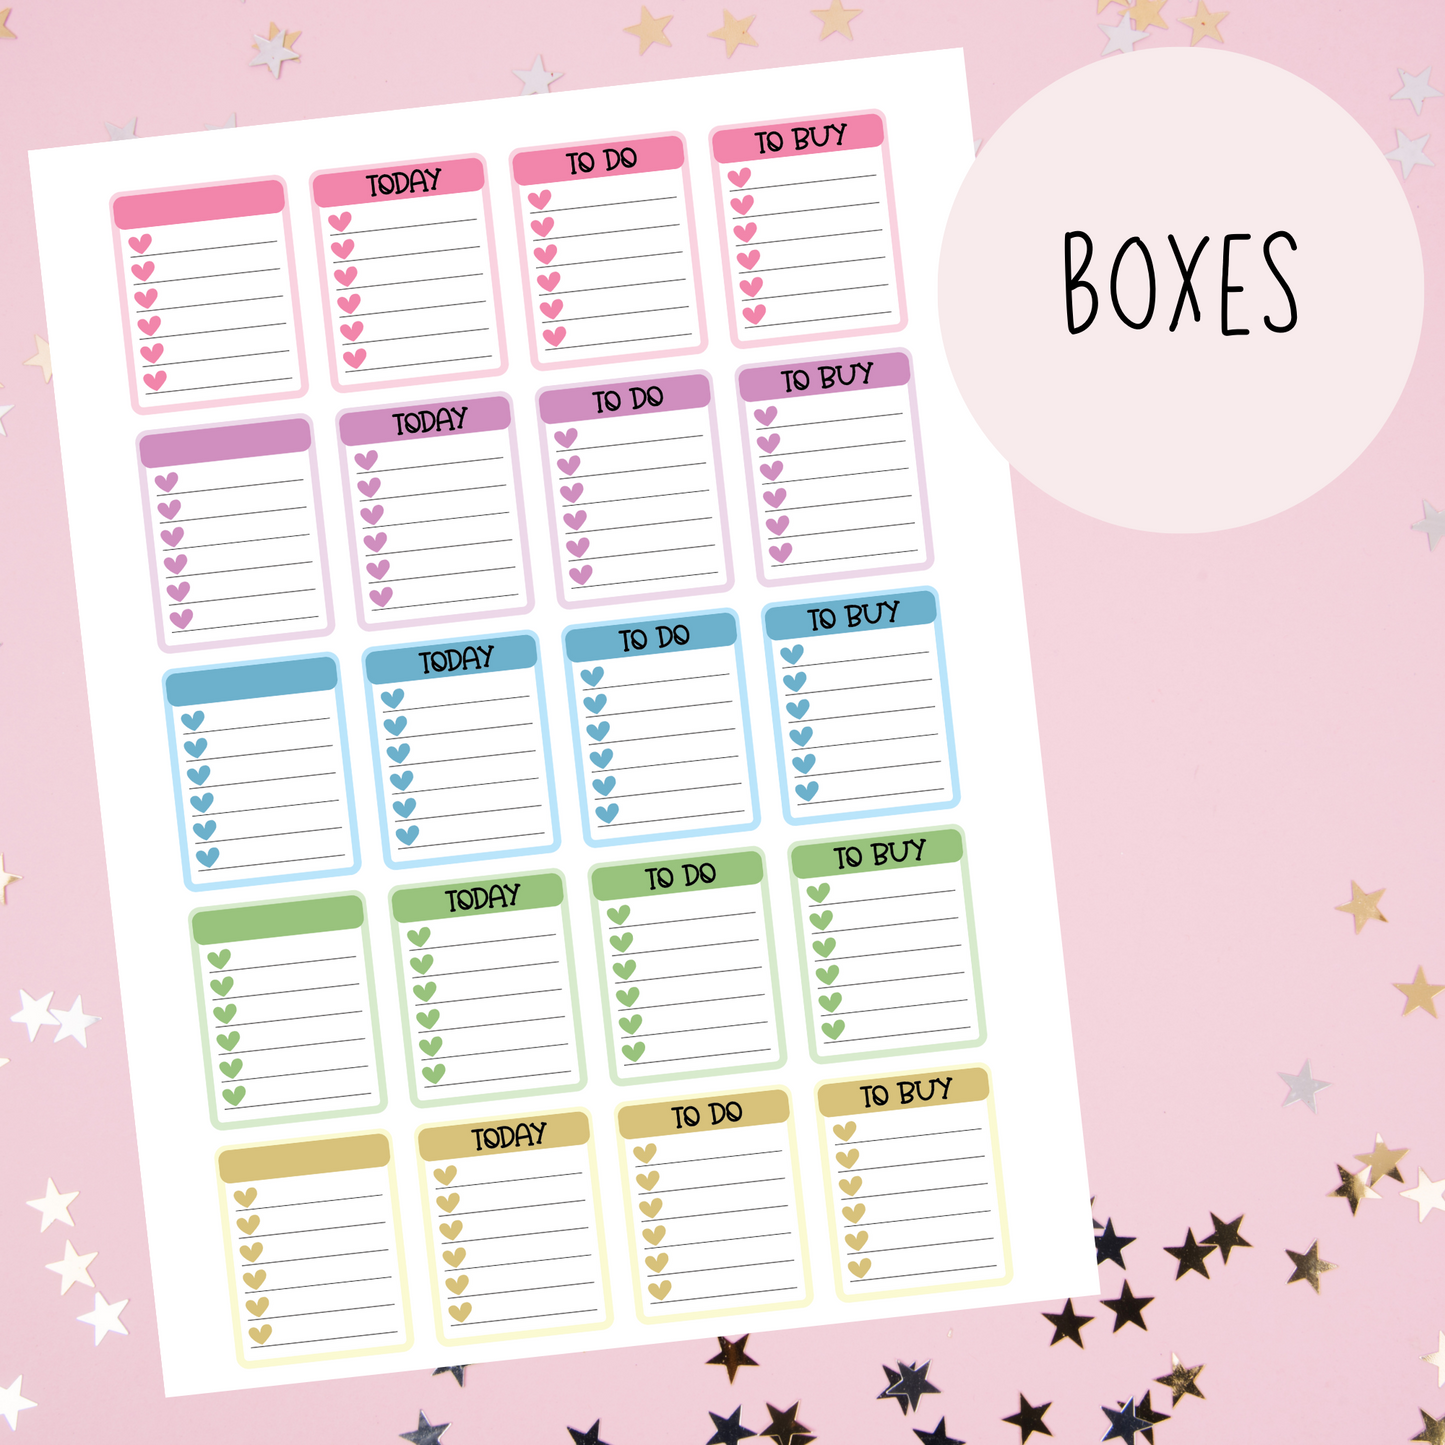 Today Boxes Planner Stickers